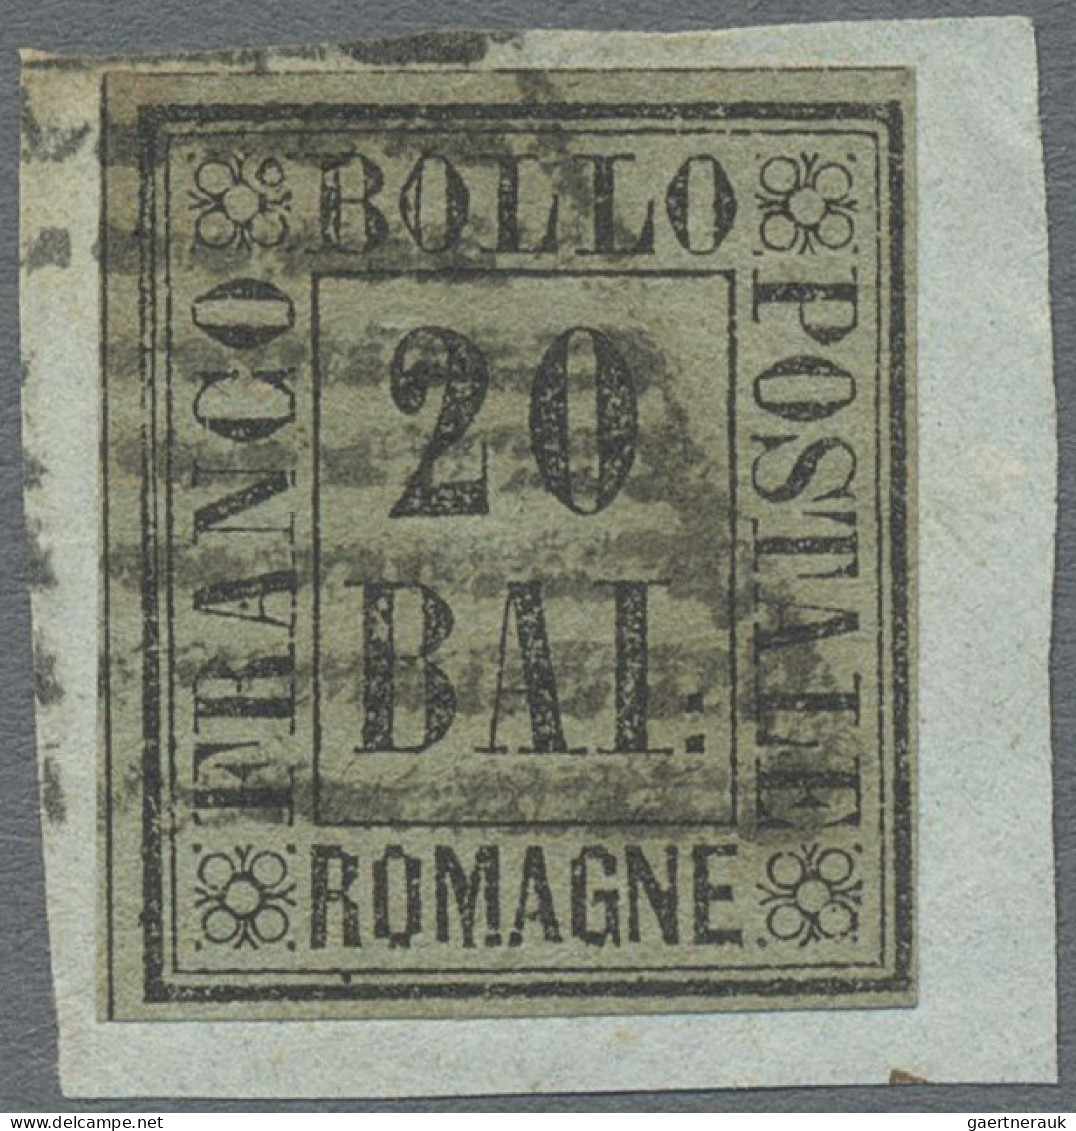 Old Italian States: Romagna: 1859, 20 Baj. Grey Green, Tied By Mute Papal Grill - Romagne